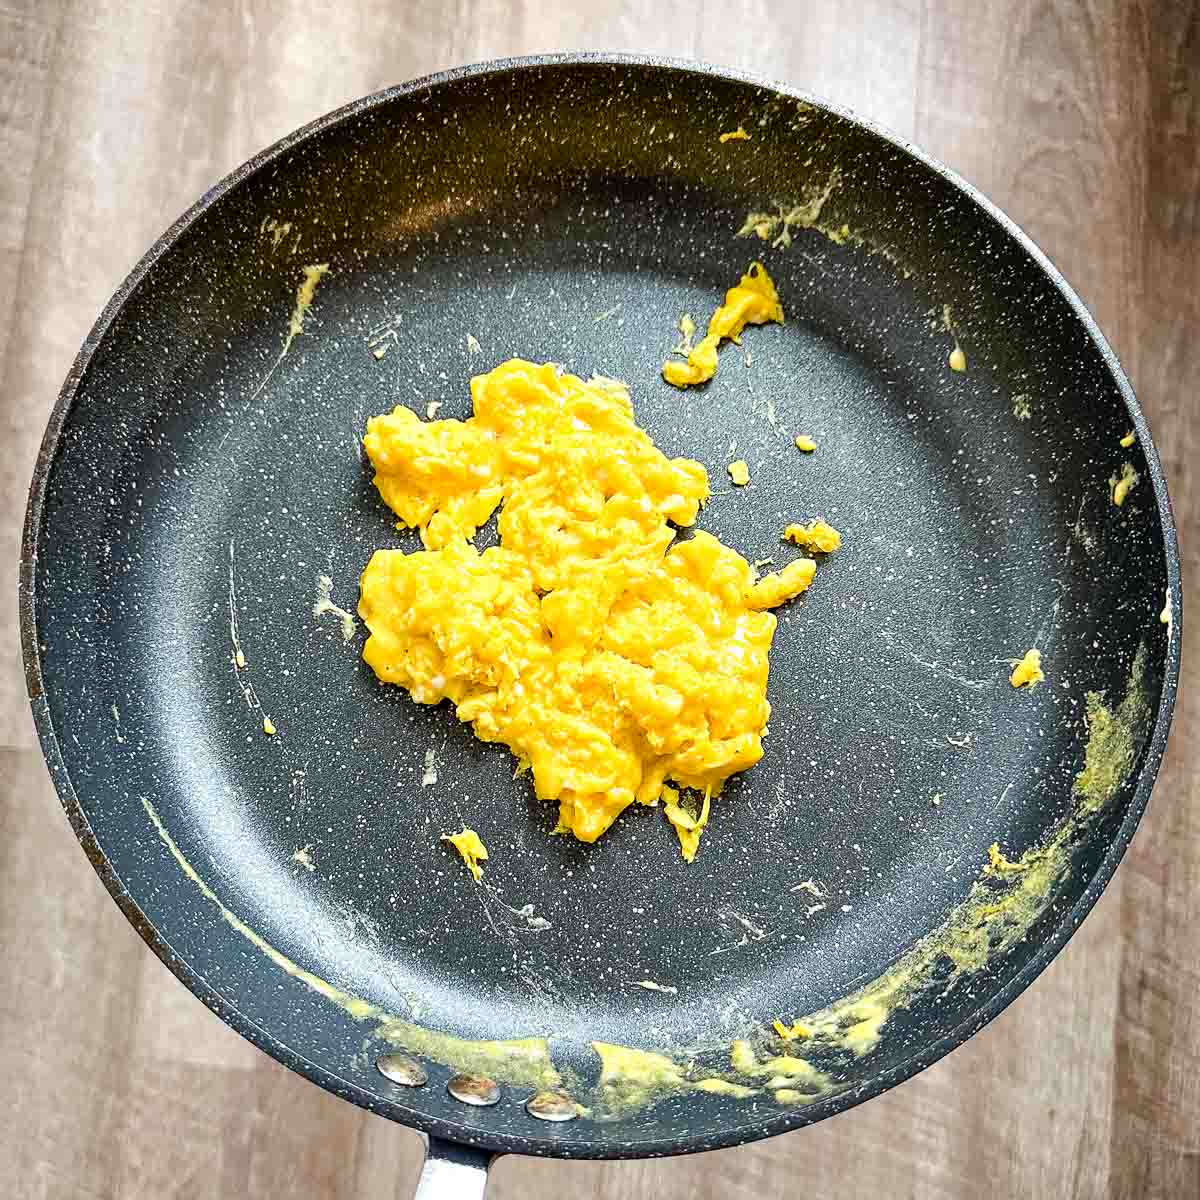 Cooked cheesy scrambled eggs sit in a black frying pan.